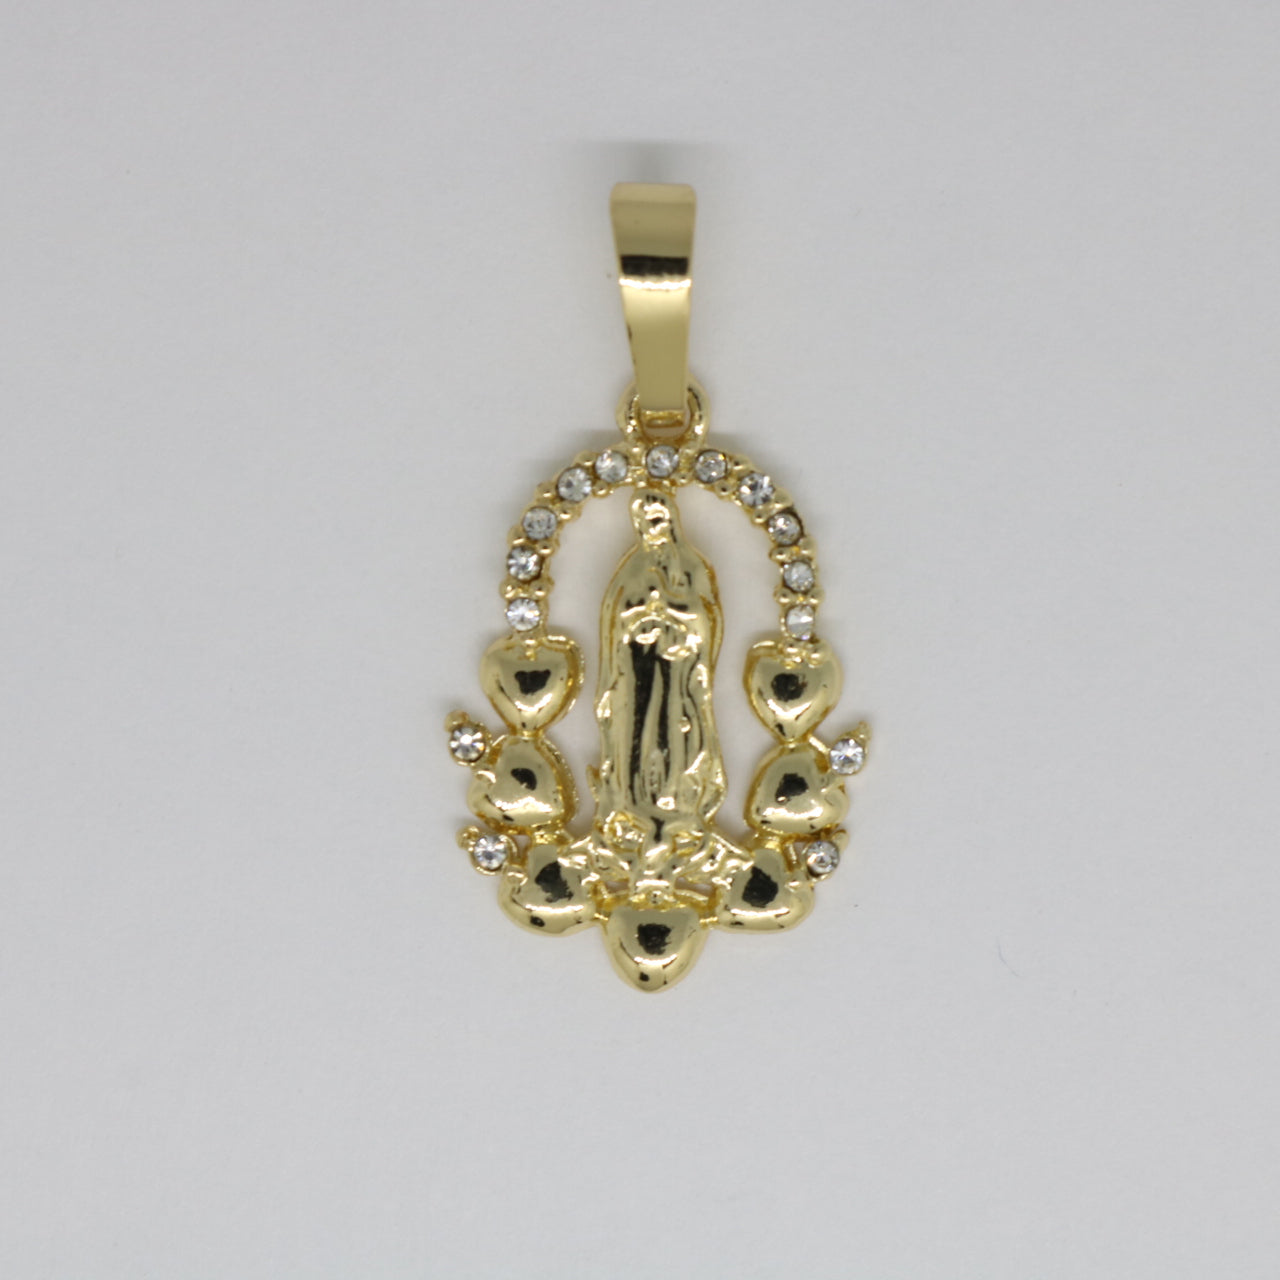 Virgin Mary w/ Solid Hearts Necklace -  Gold